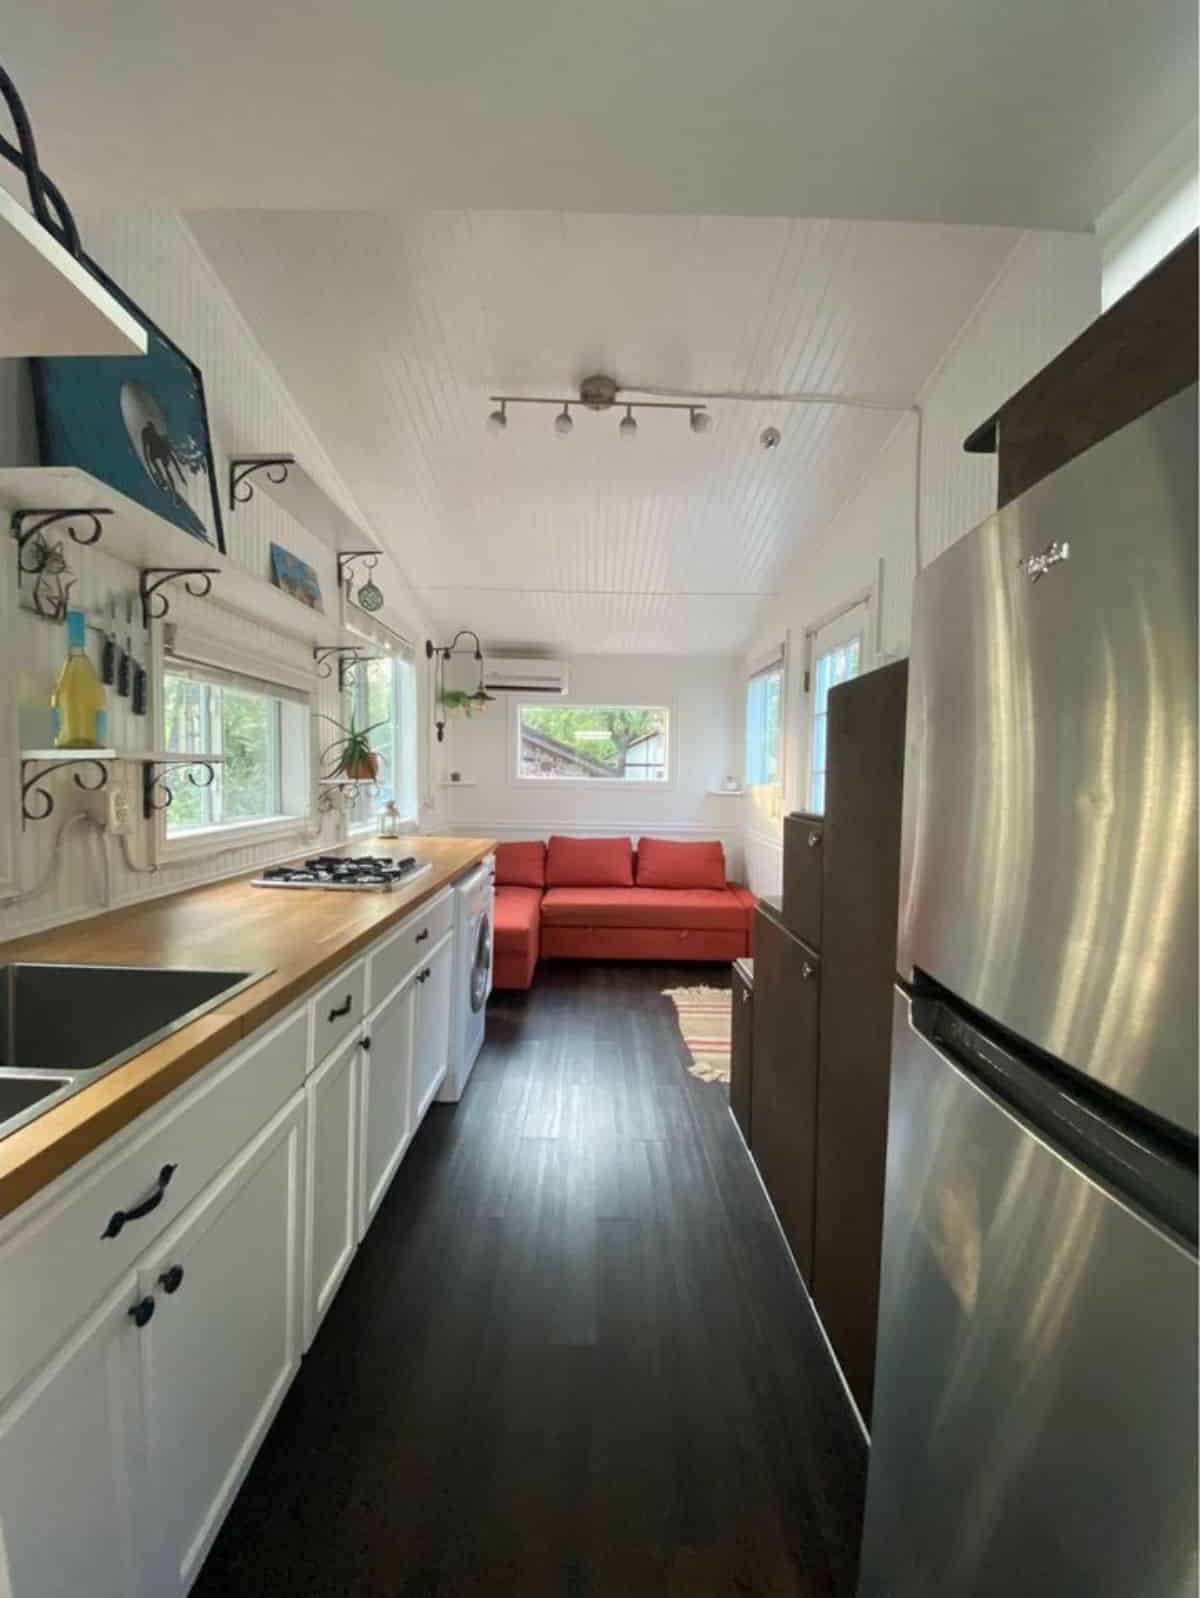 full length interiors of 20’ tiny home from kitchen point of view